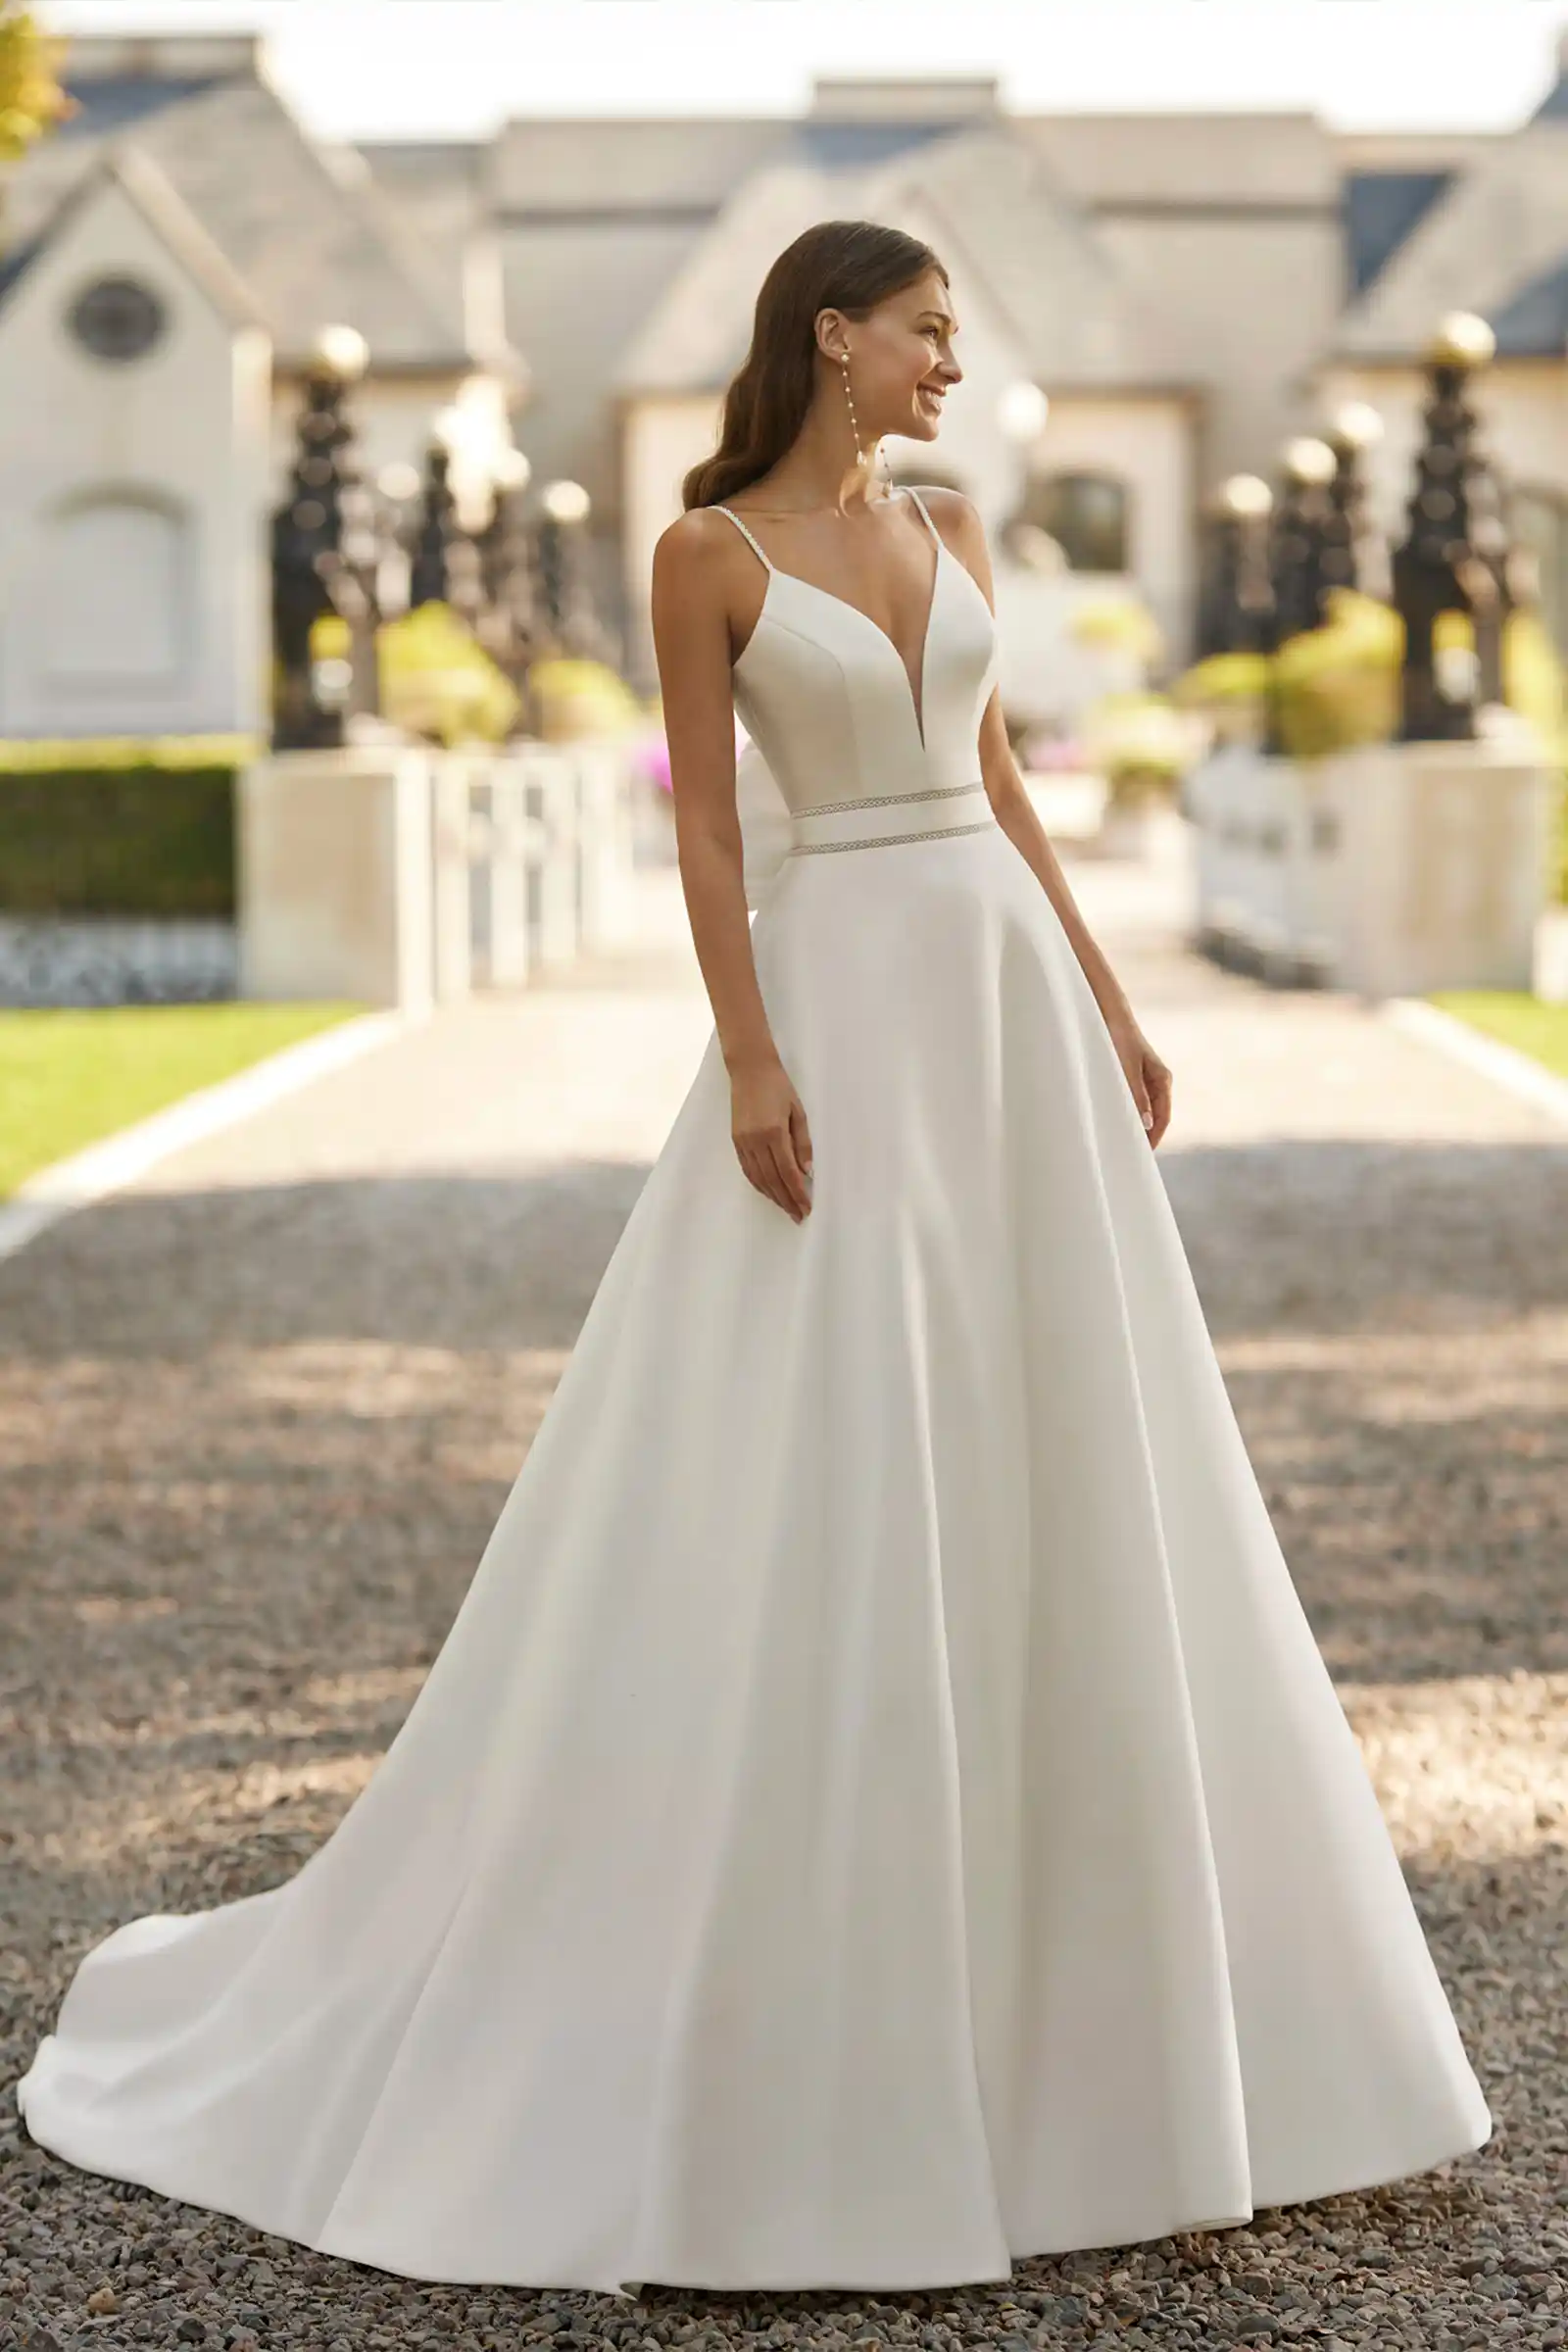 Featured image for “Brautkleid Eume”